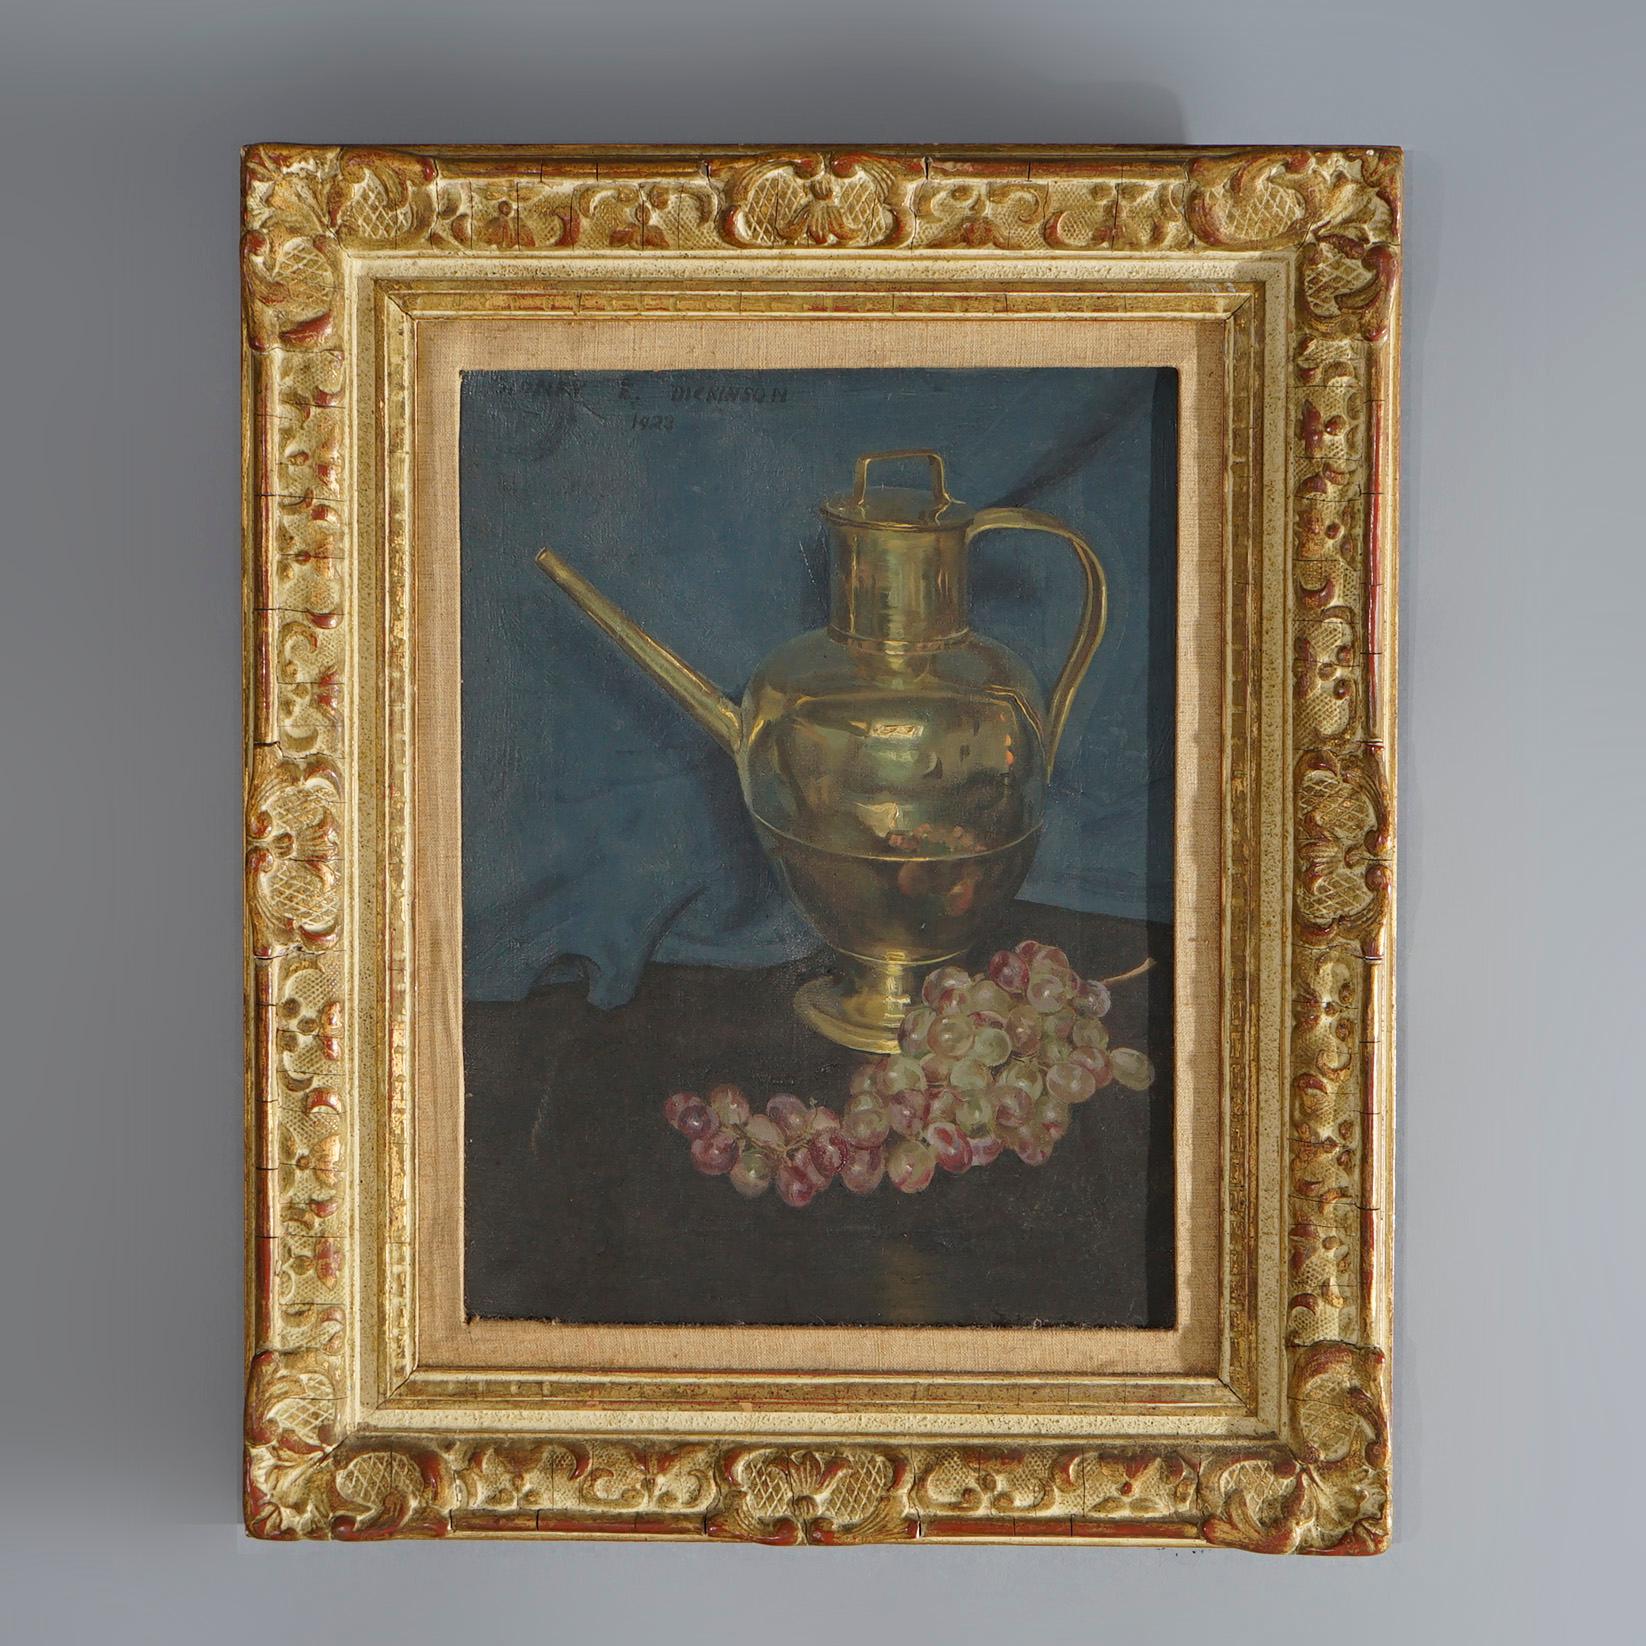 An antique painting by Sidney E Dickinson dated 1923 offers oil on canvas tabletop fruit still life with brass pitcher and grapes, artist signed upper left, seated in giltwood frame, early 20th century.

Measures- 18.75''H x 22.75''W x 2''D